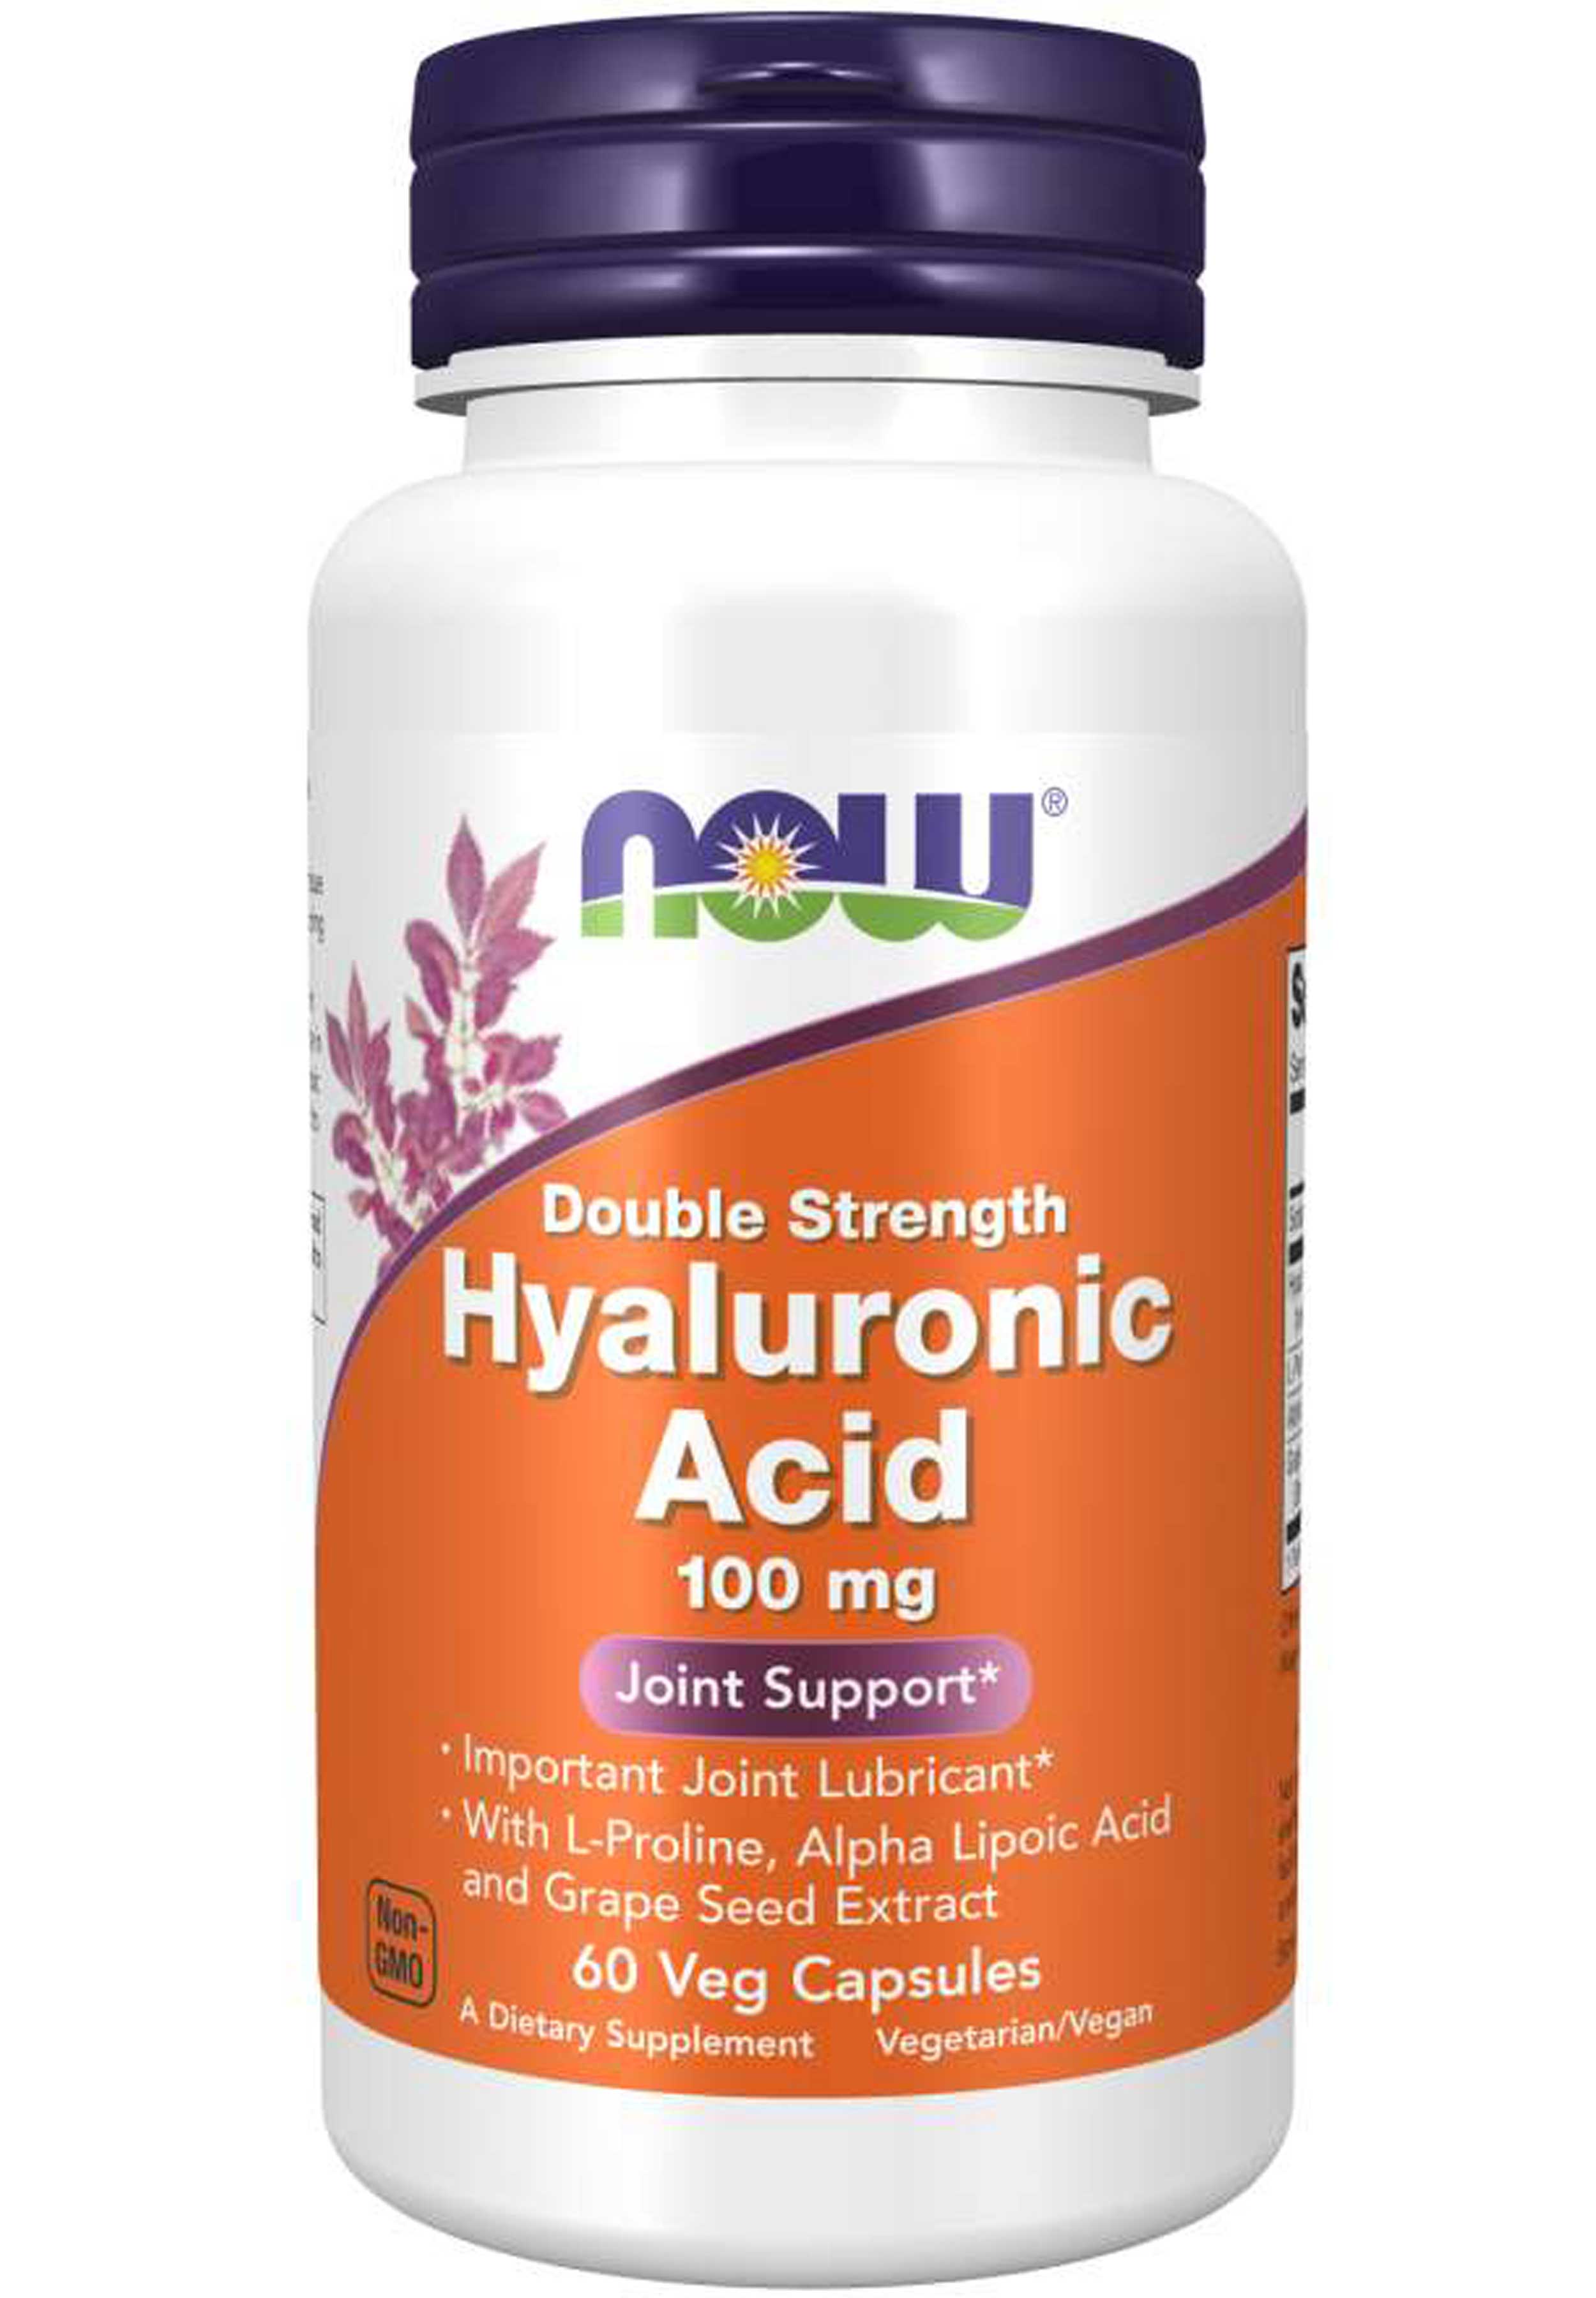 NOW Double Strength Hyaluronic Acid 100 mg